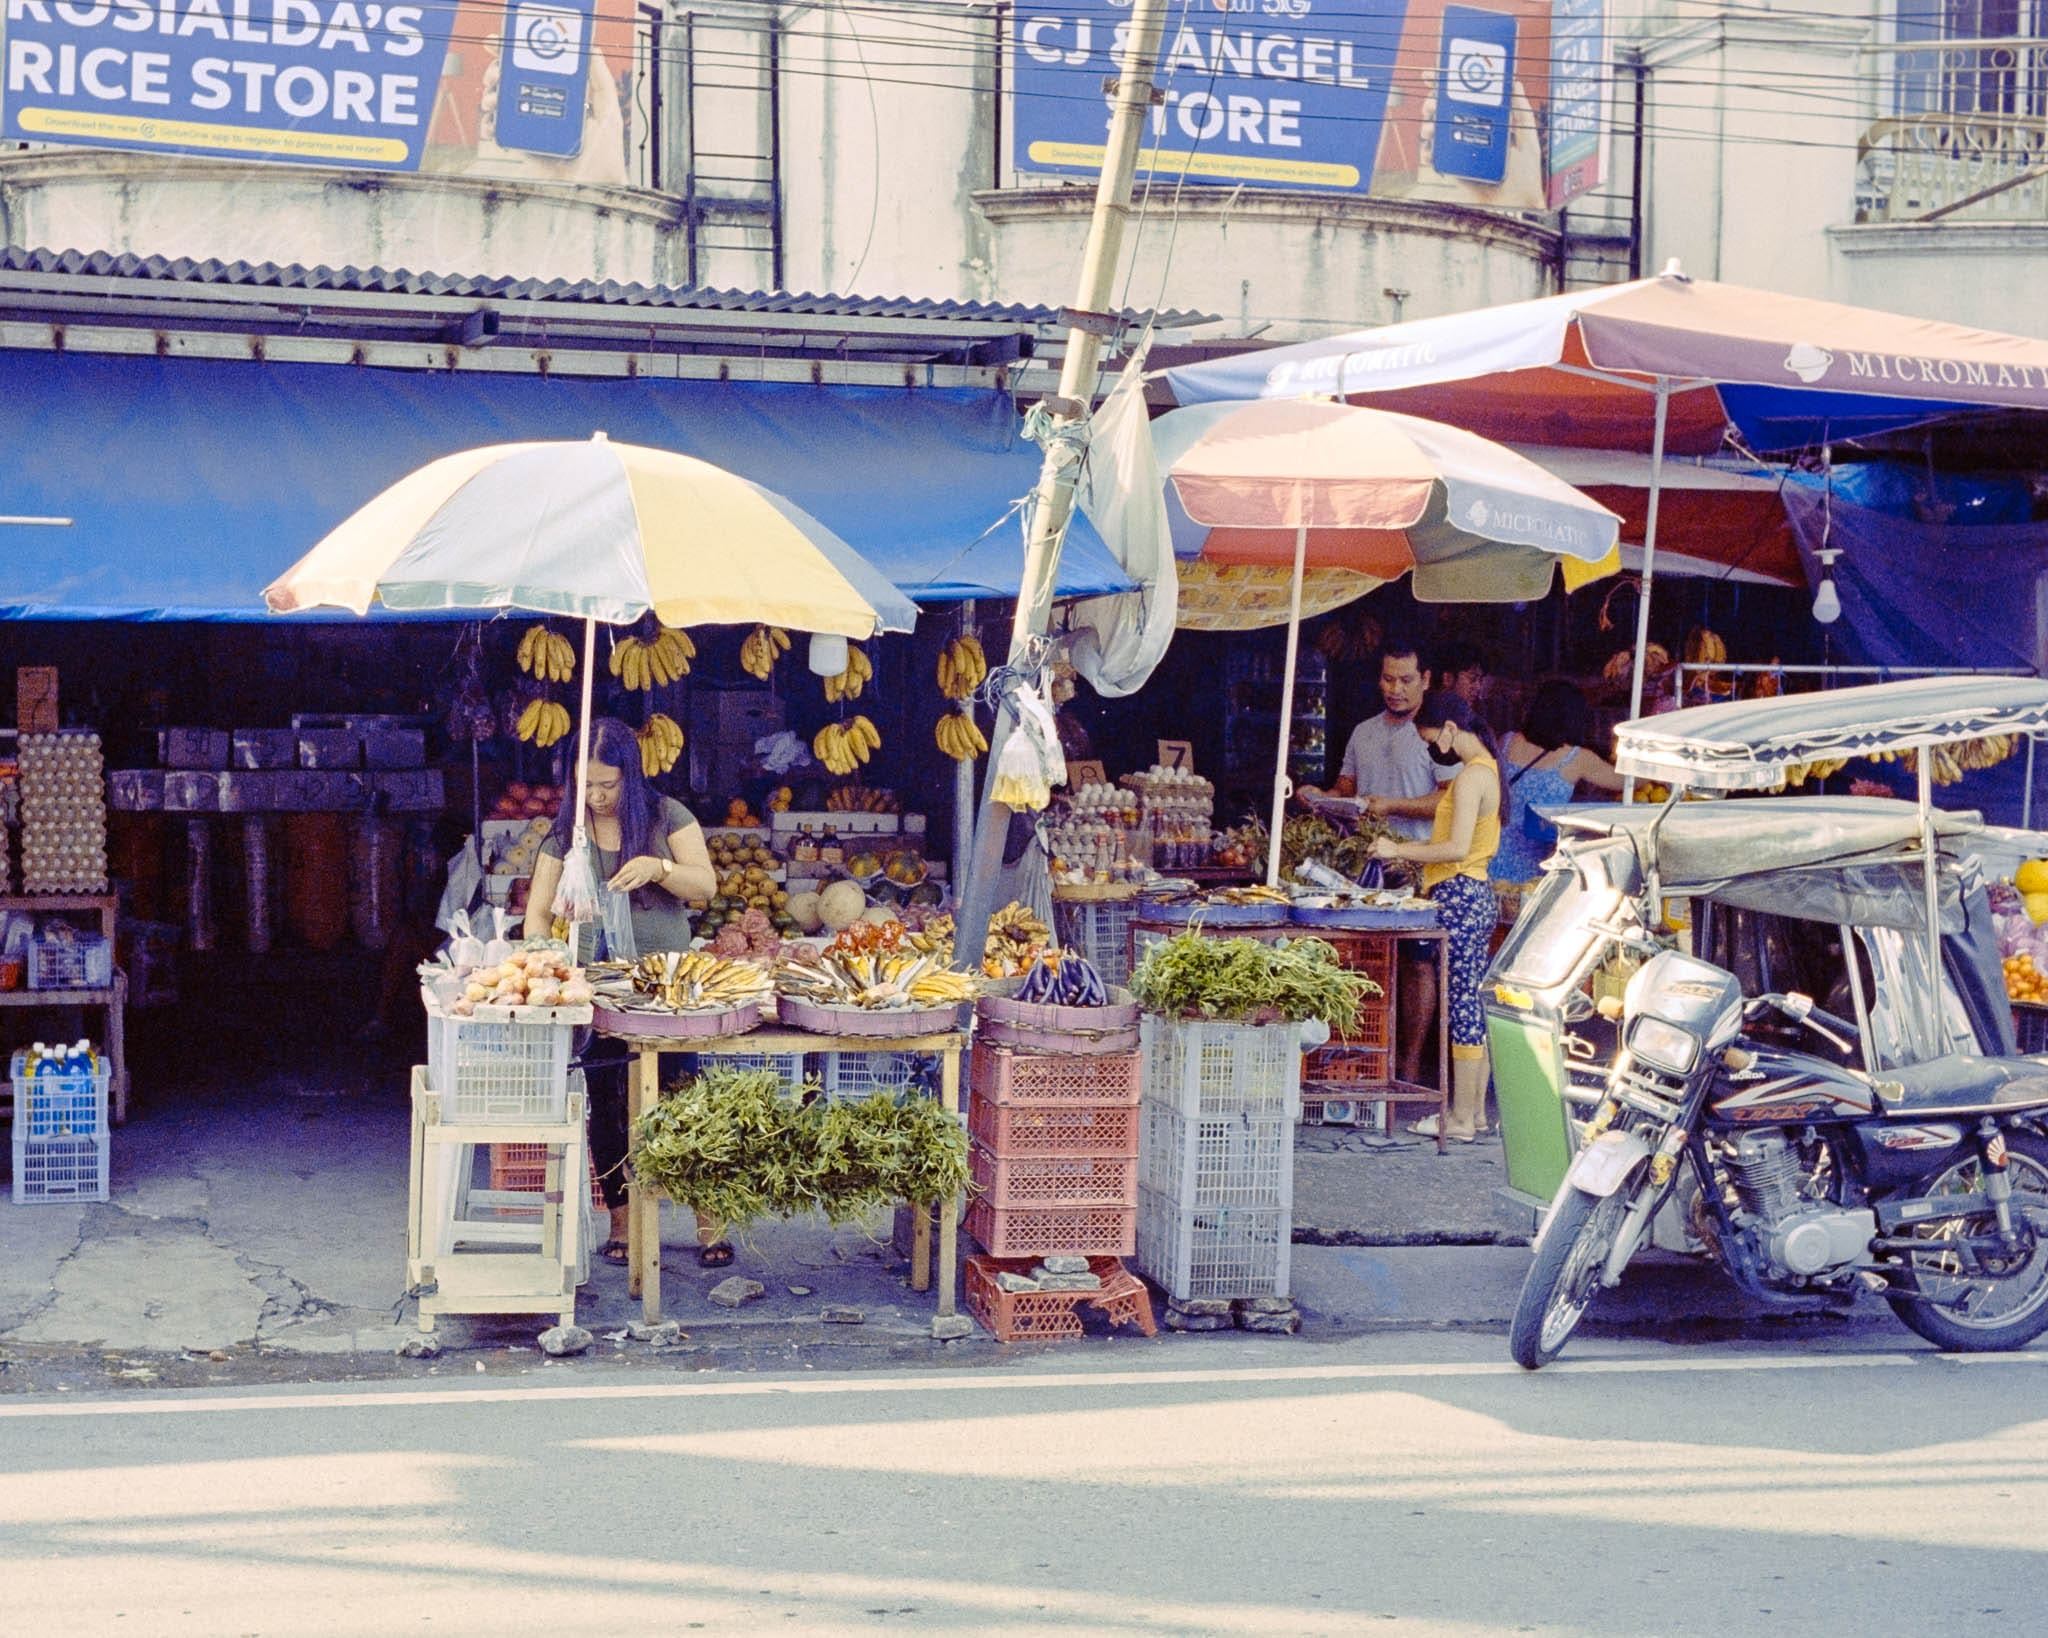 Philippines street market scene with colorful fruit stalls, parked tricycle, and local shops under clear sky.